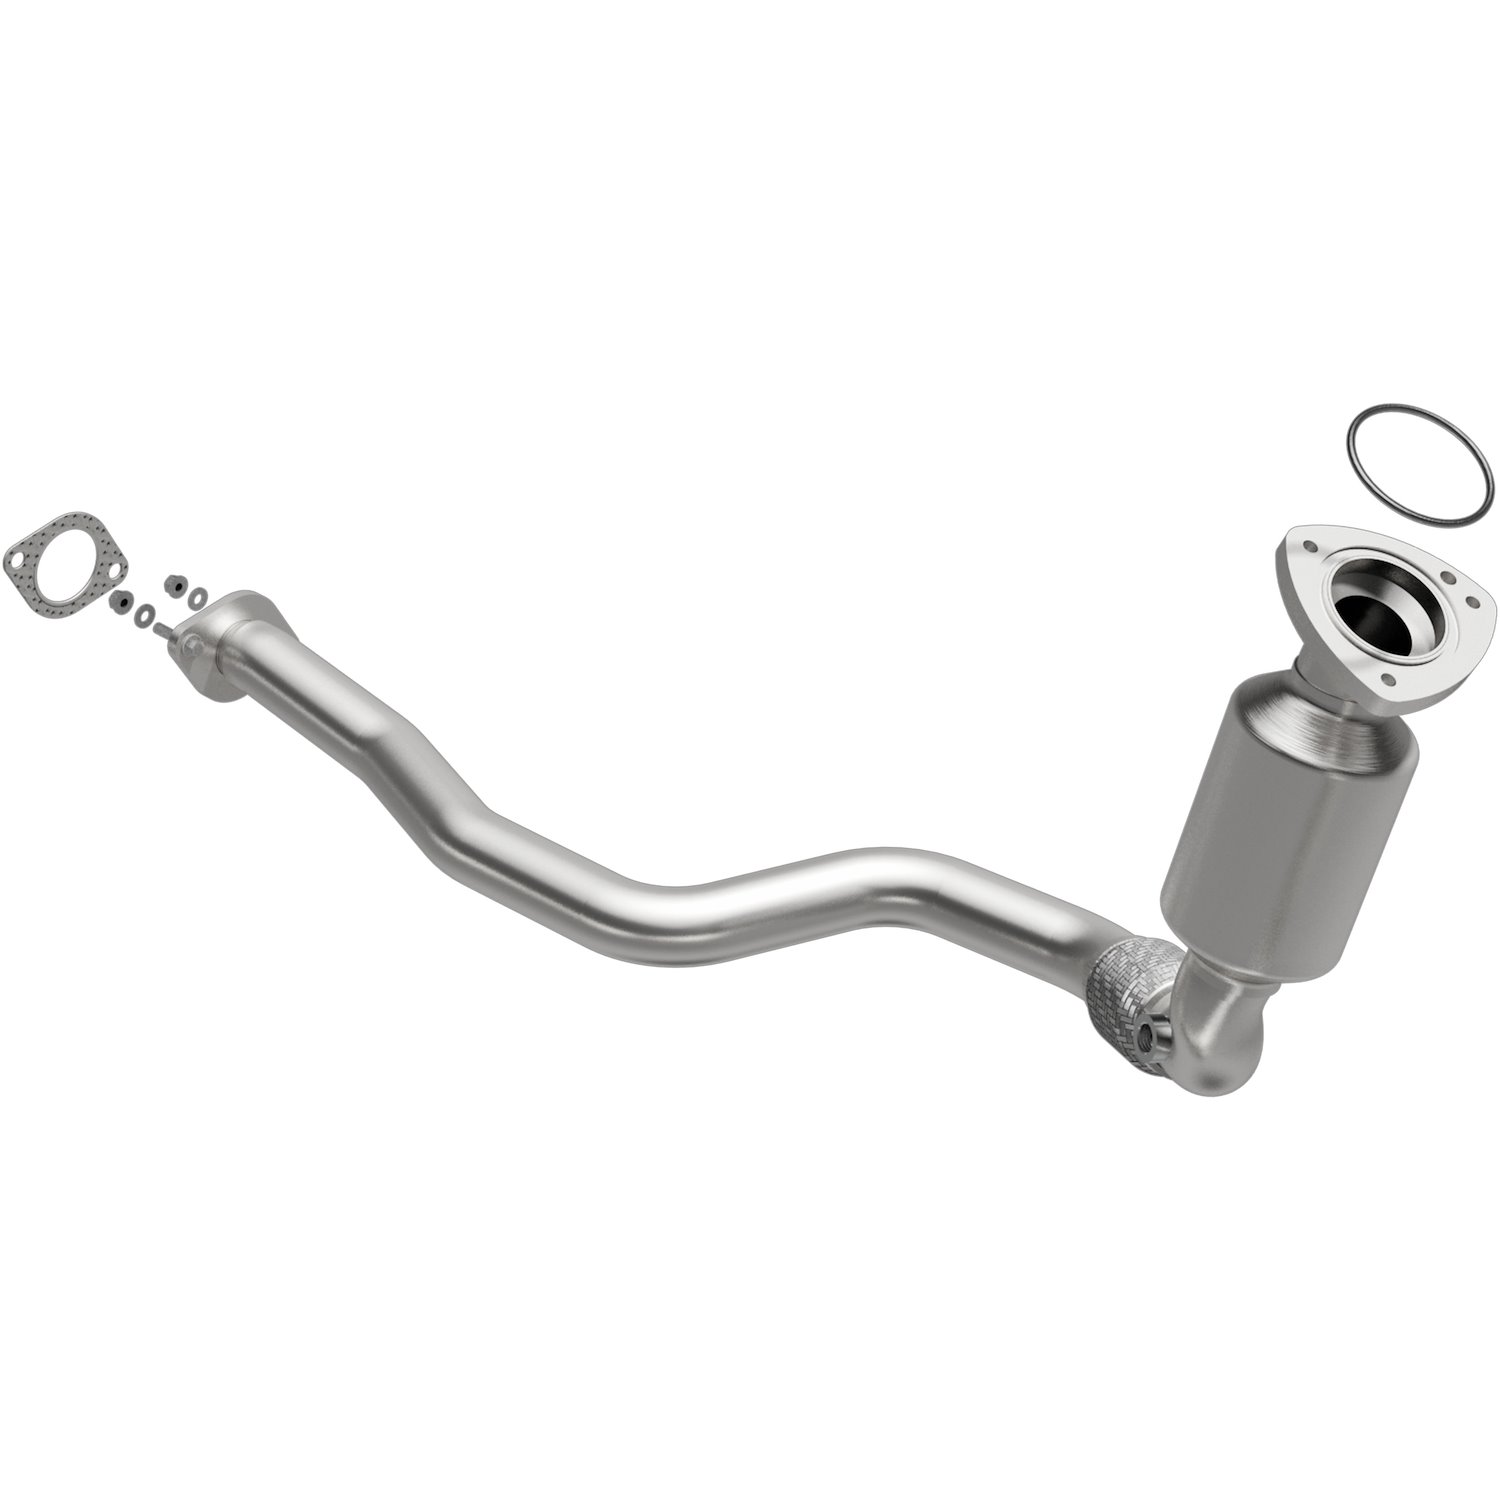 OEM Grade Federal / EPA Compliant Direct-Fit Catalytic Converter 52096